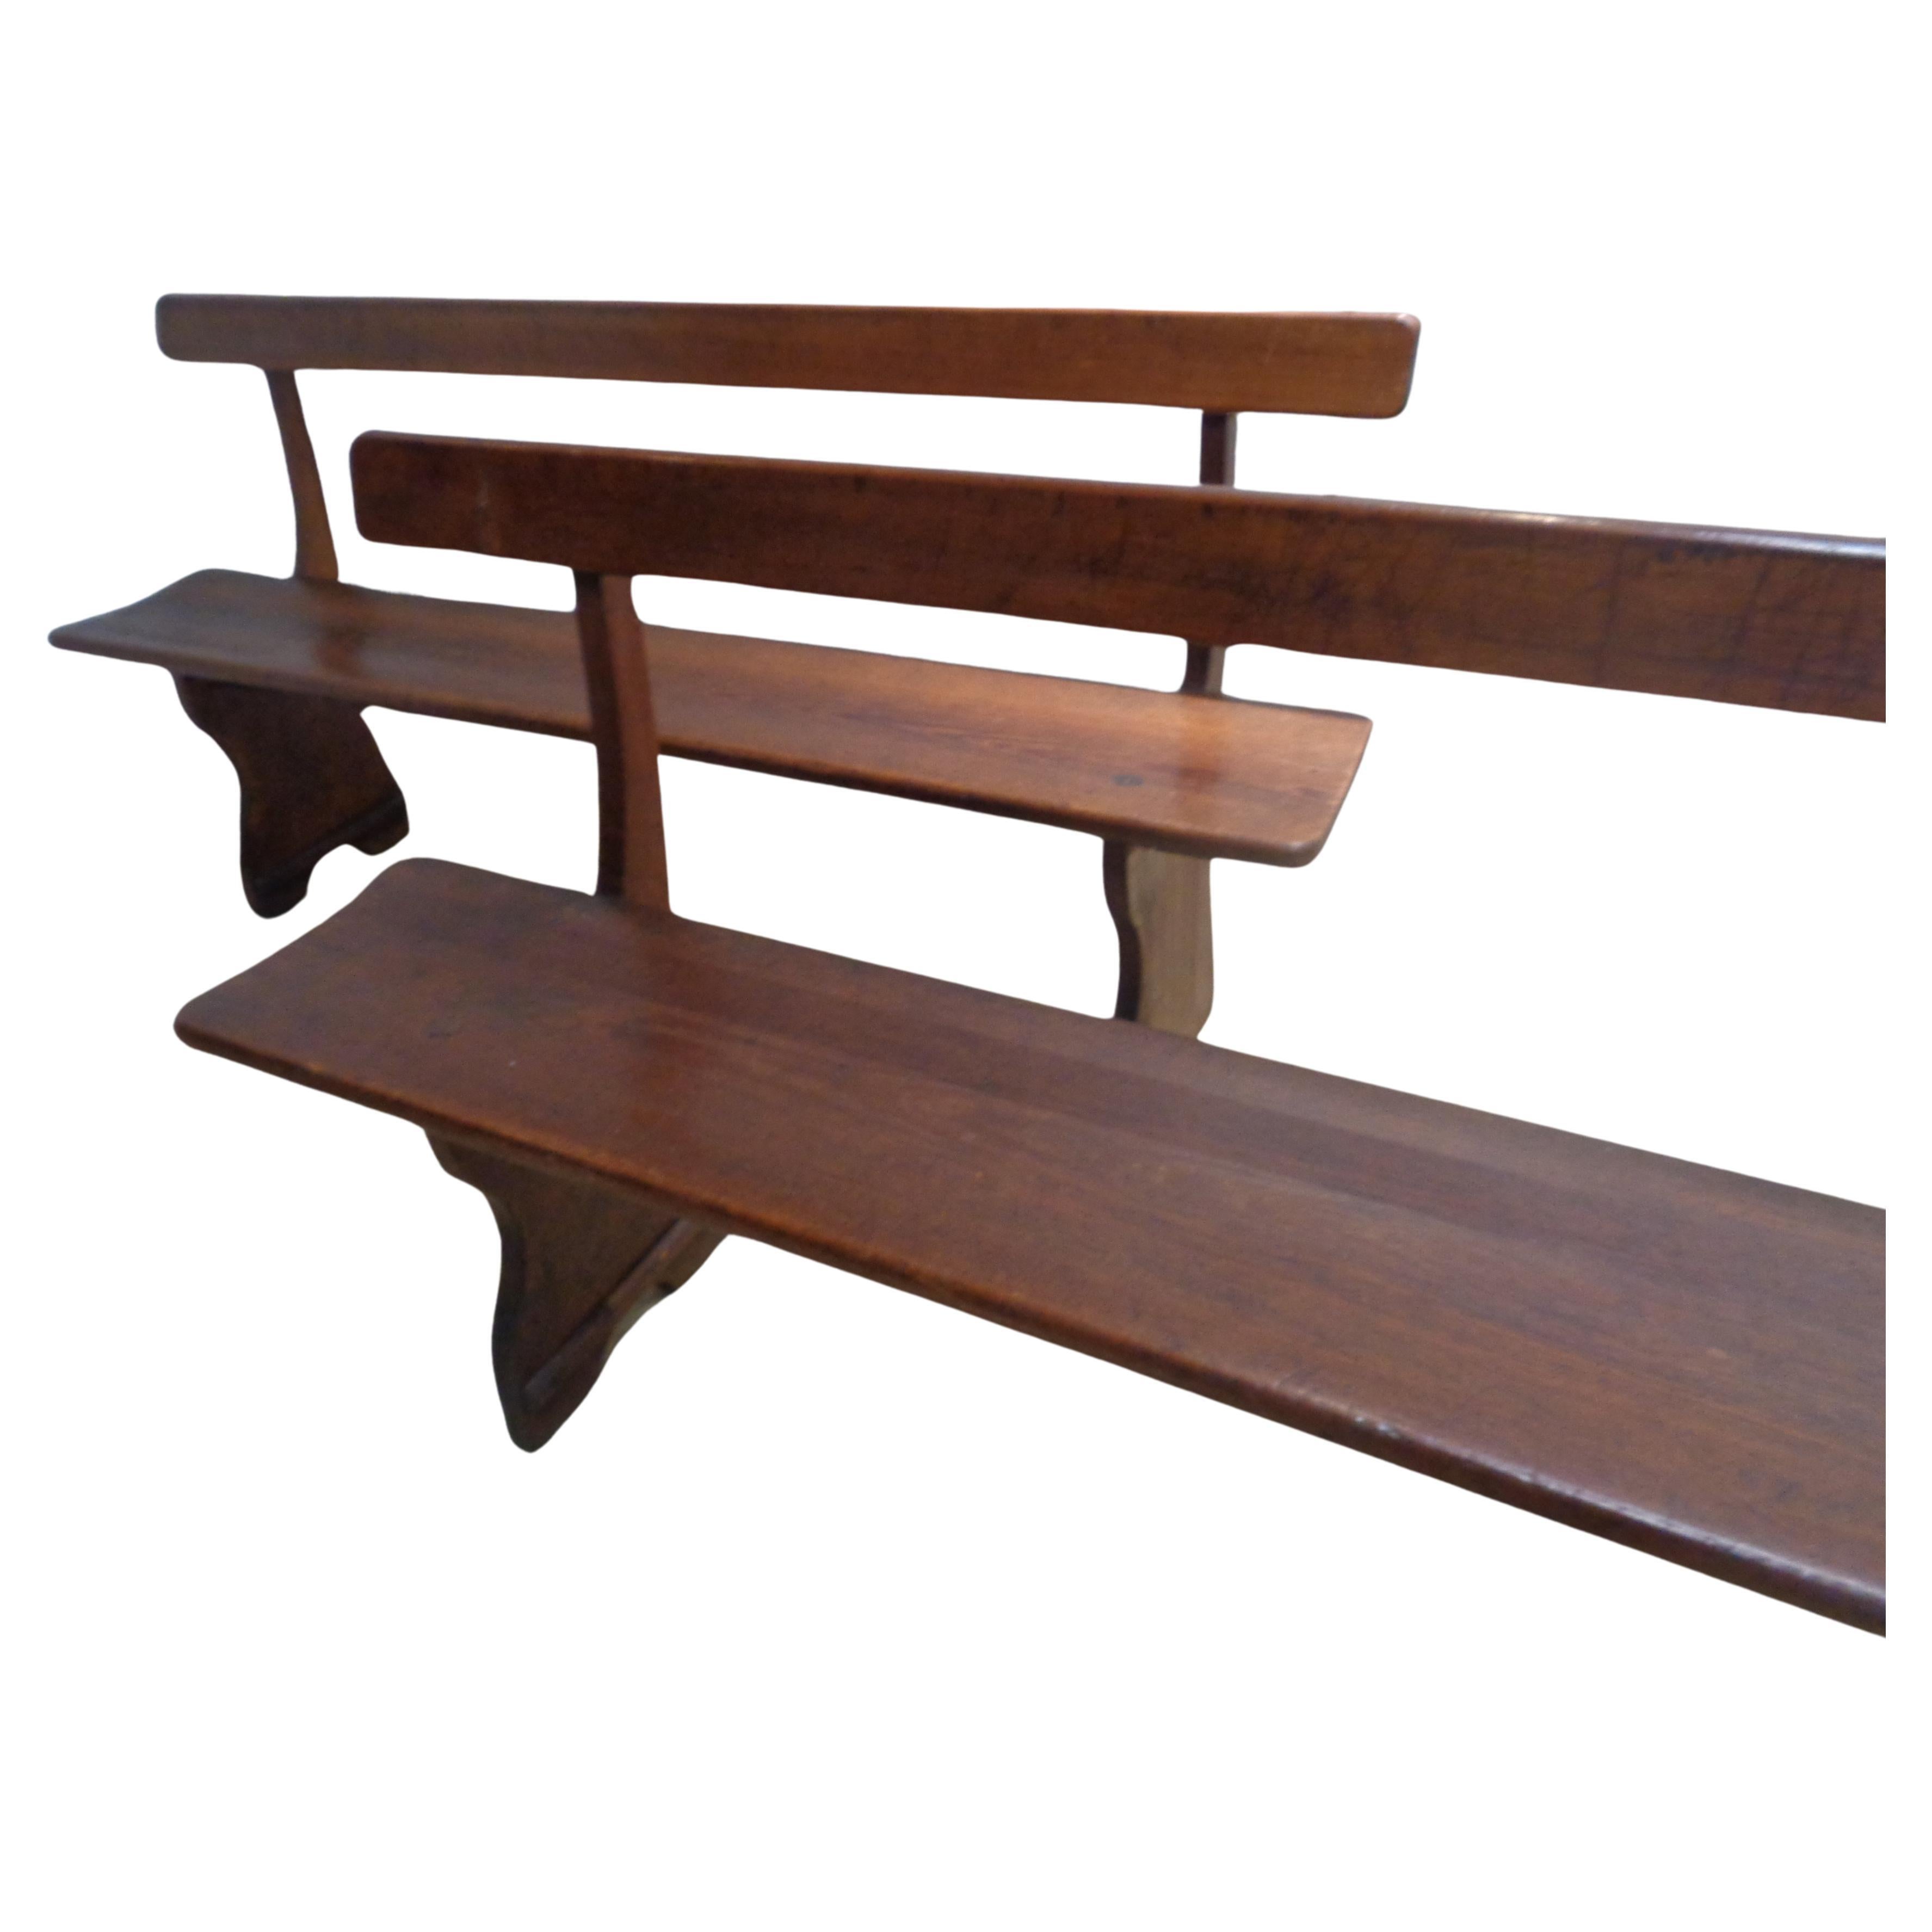  Exceptional Antique American Country Benches For Sale 9